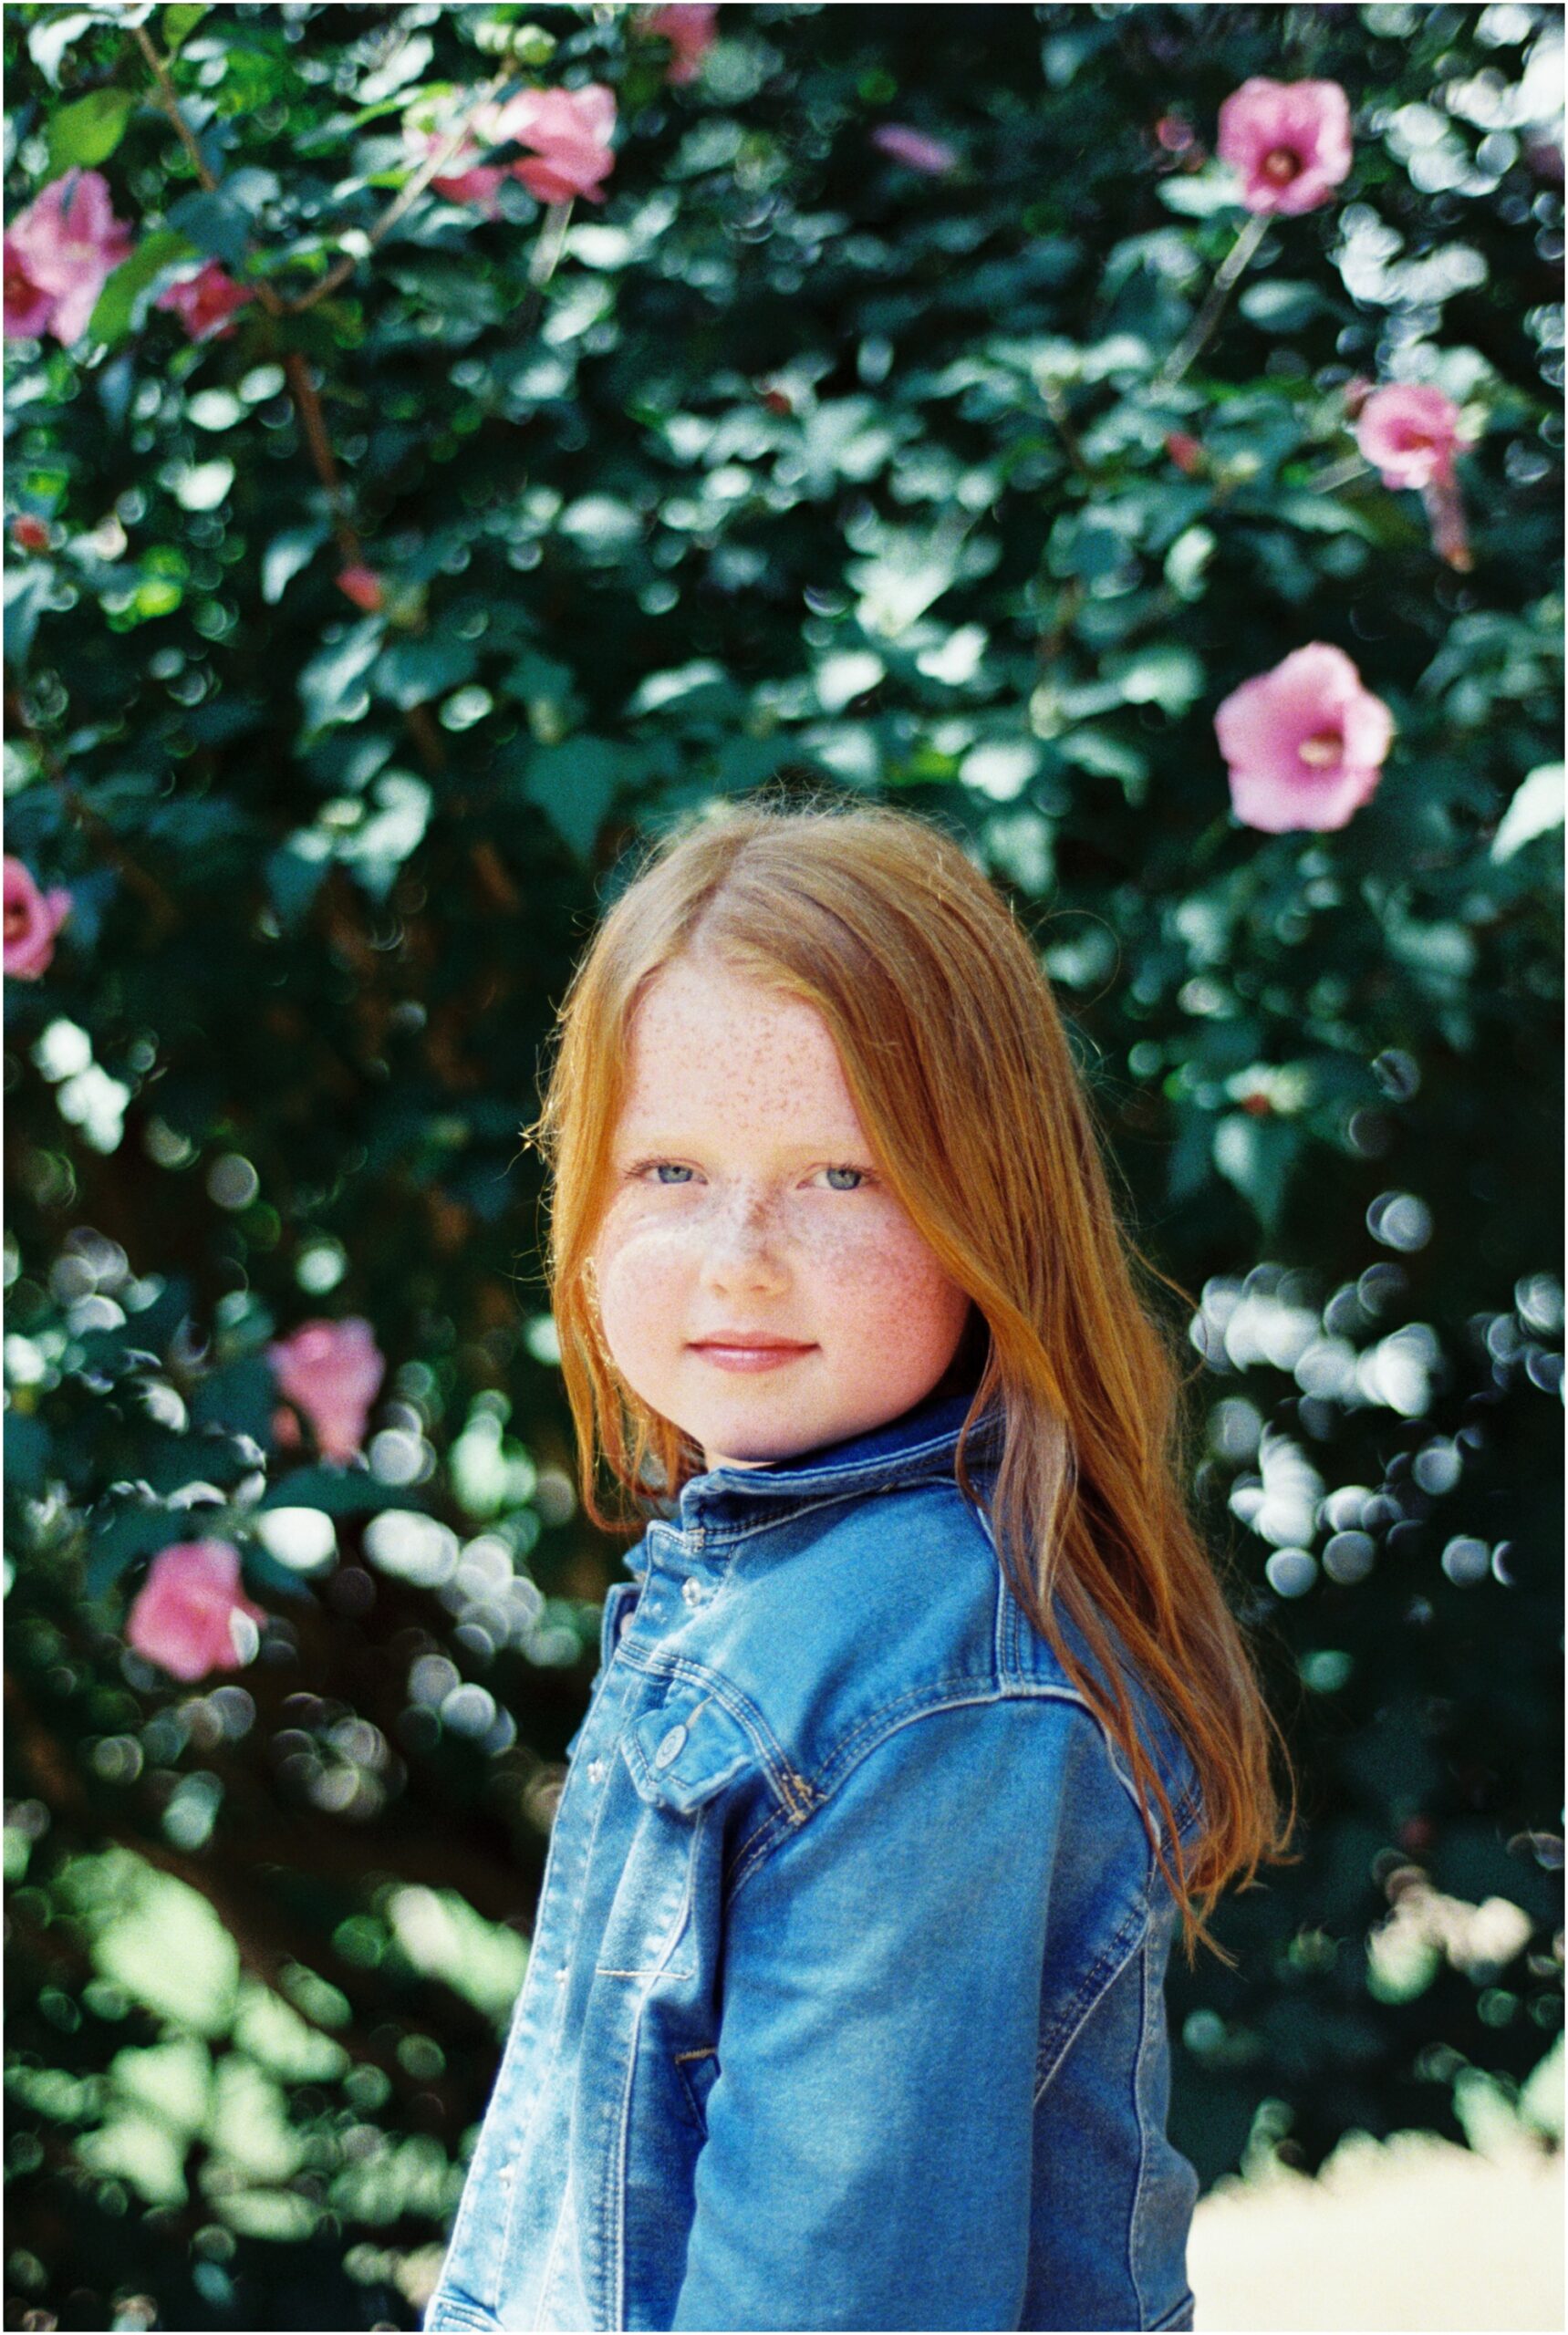 Portrait of a young red headed girl in front of a blooming bush shot on film.